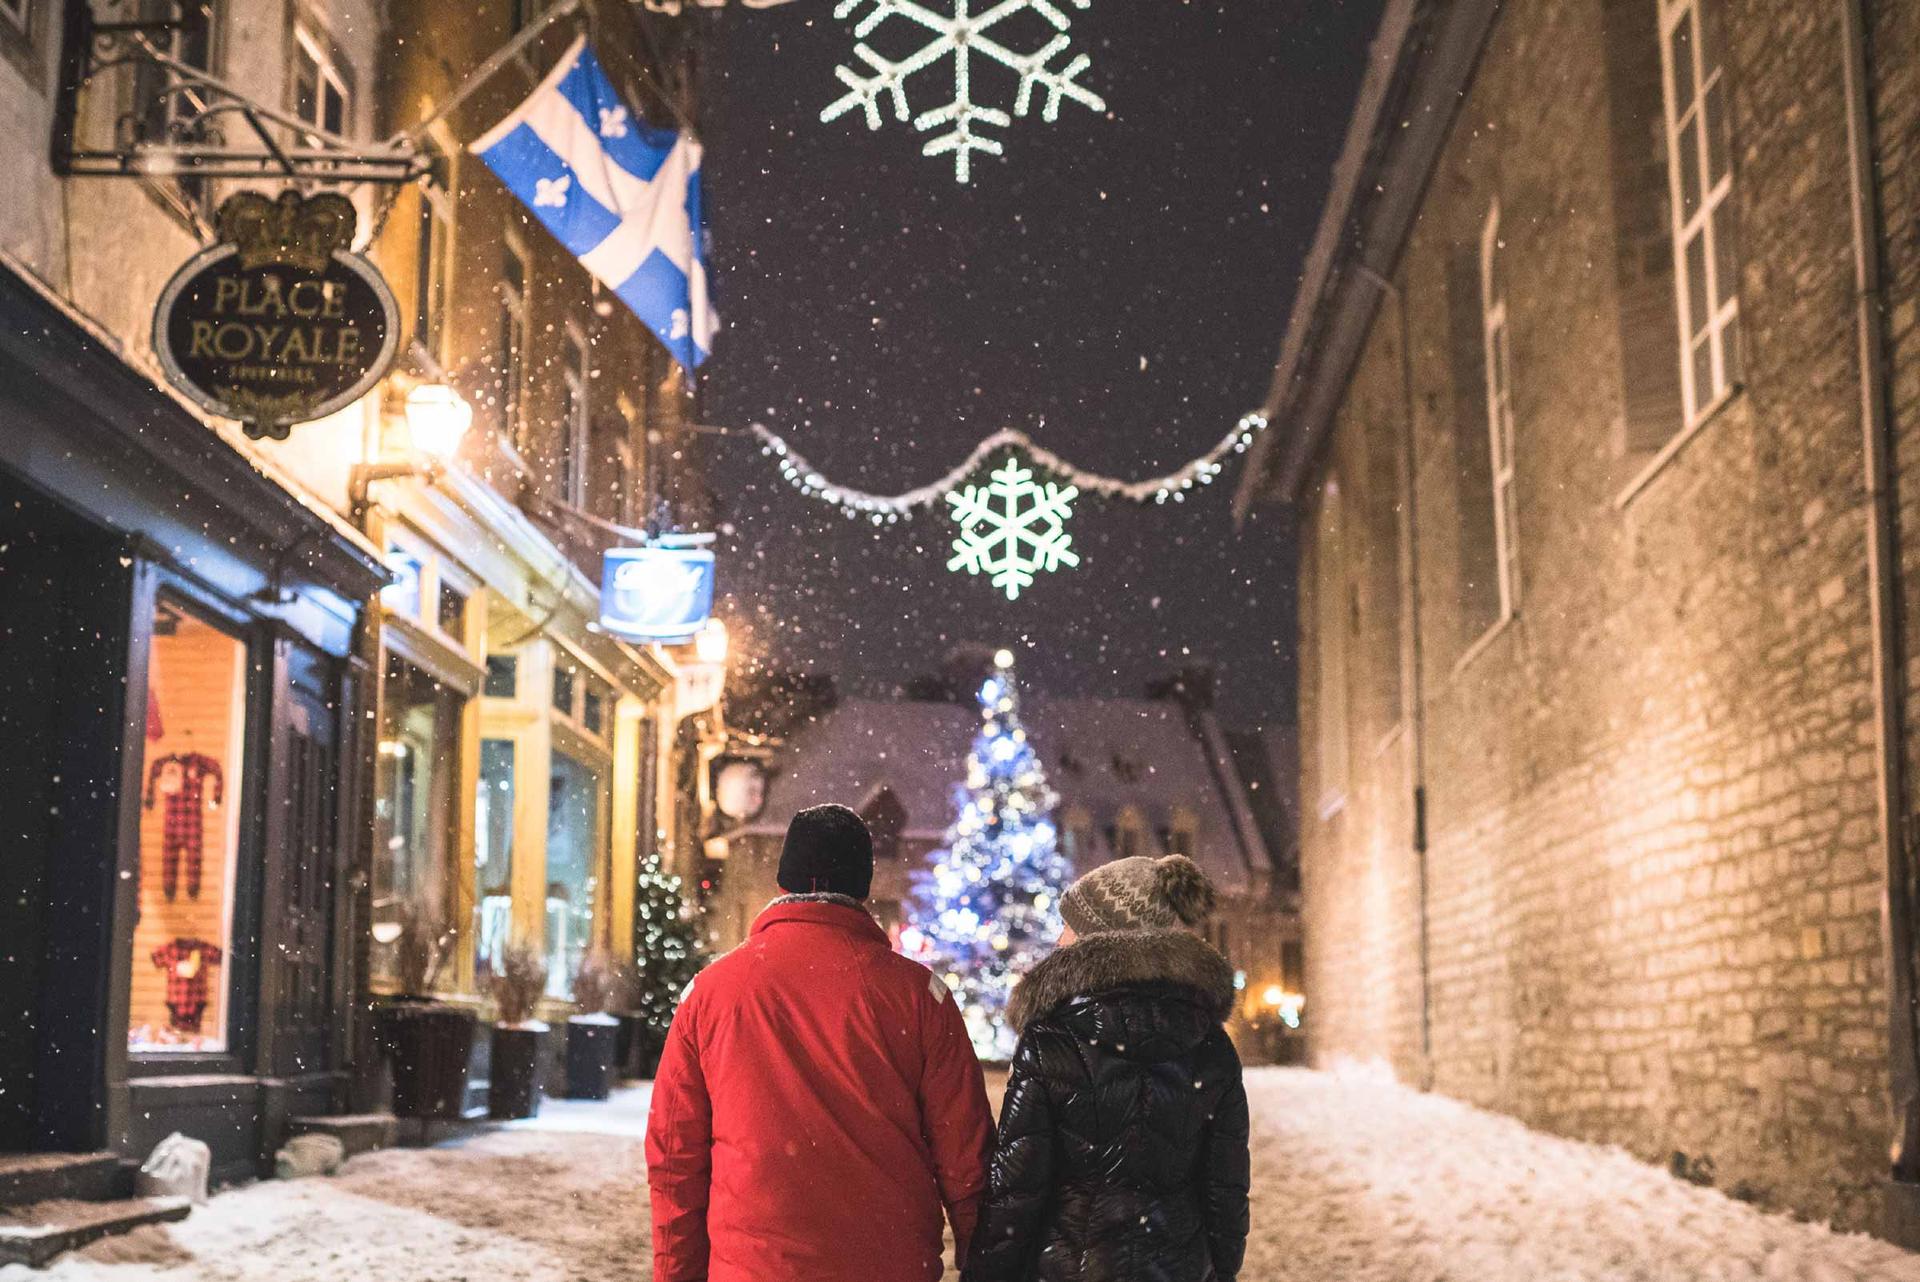 Two people walking down a snow-covered street in Vieux Quebec at night